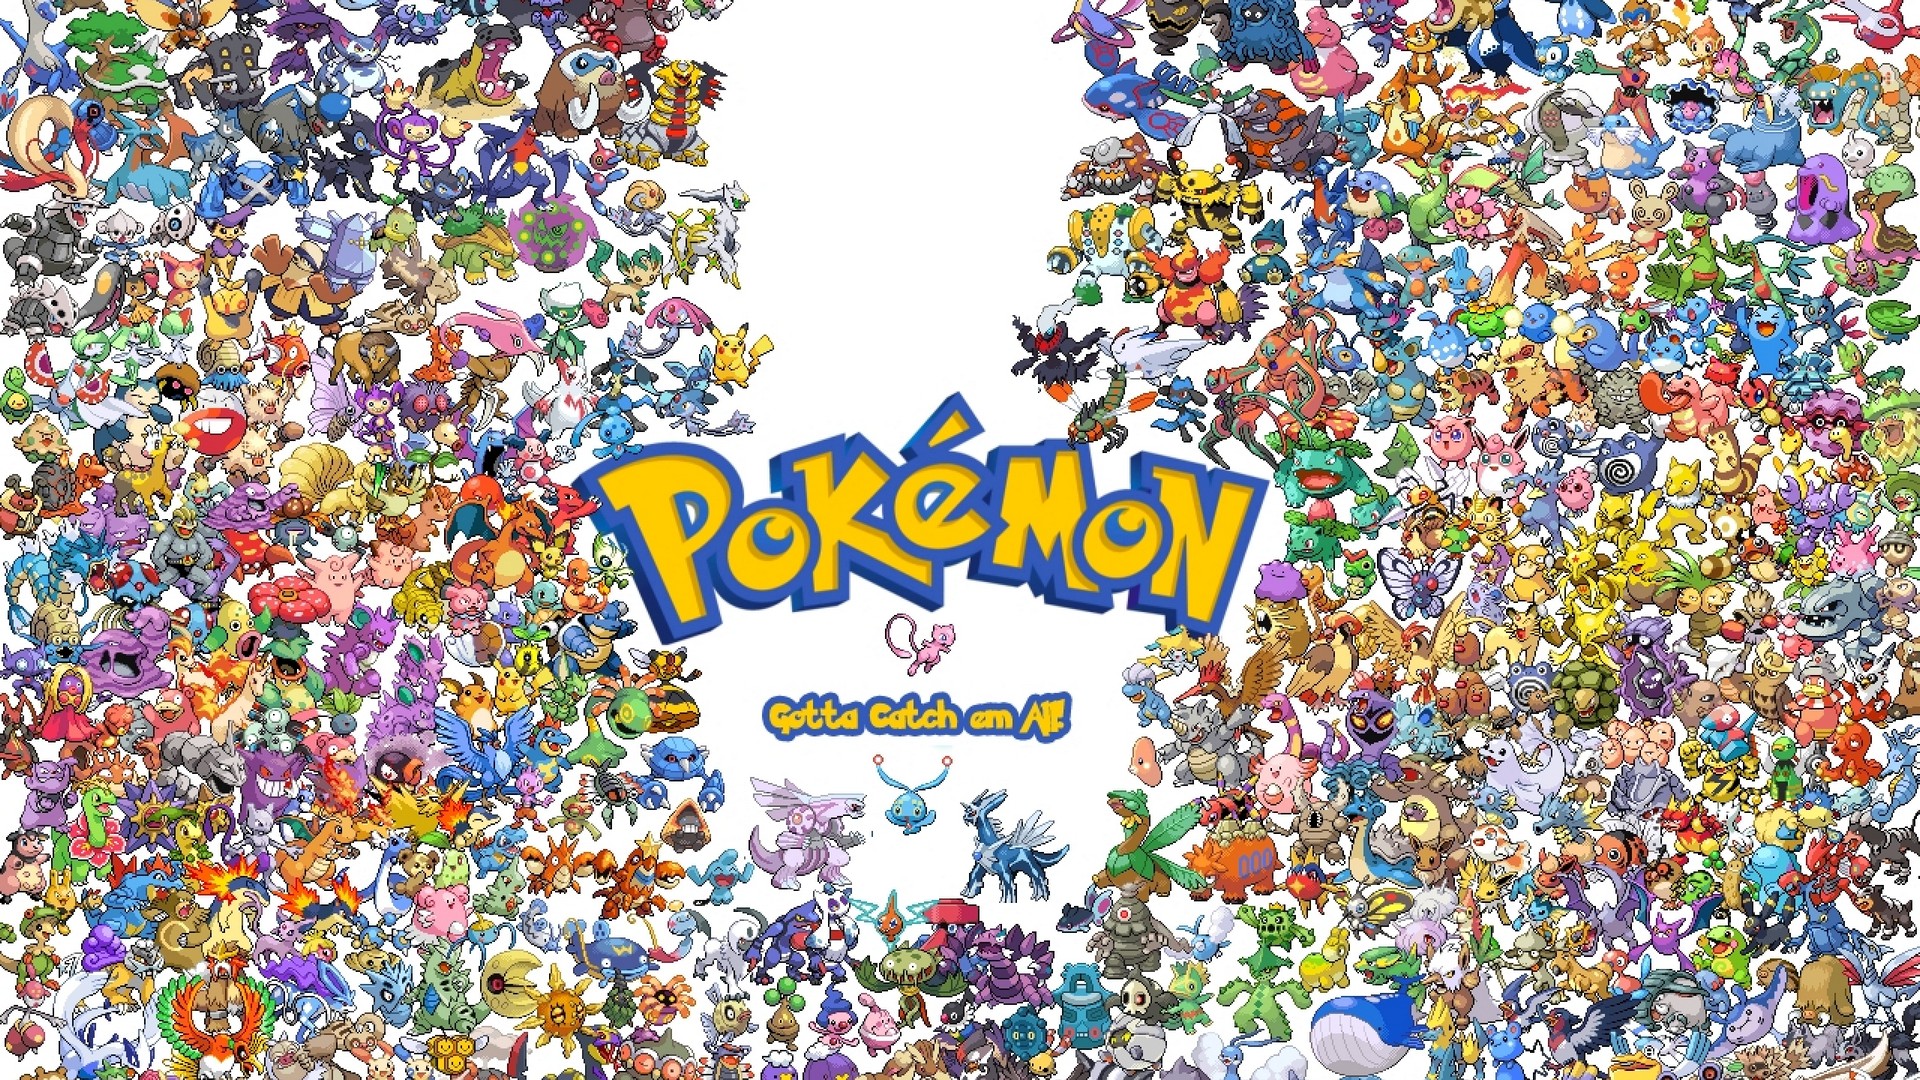 Wallpapers Computer Pokemon With high-resolution 1920X1080 pixel. You can use this wallpaper for your Desktop Computer Backgrounds, Mac Wallpapers, Android Lock screen or iPhone Screensavers and another smartphone device